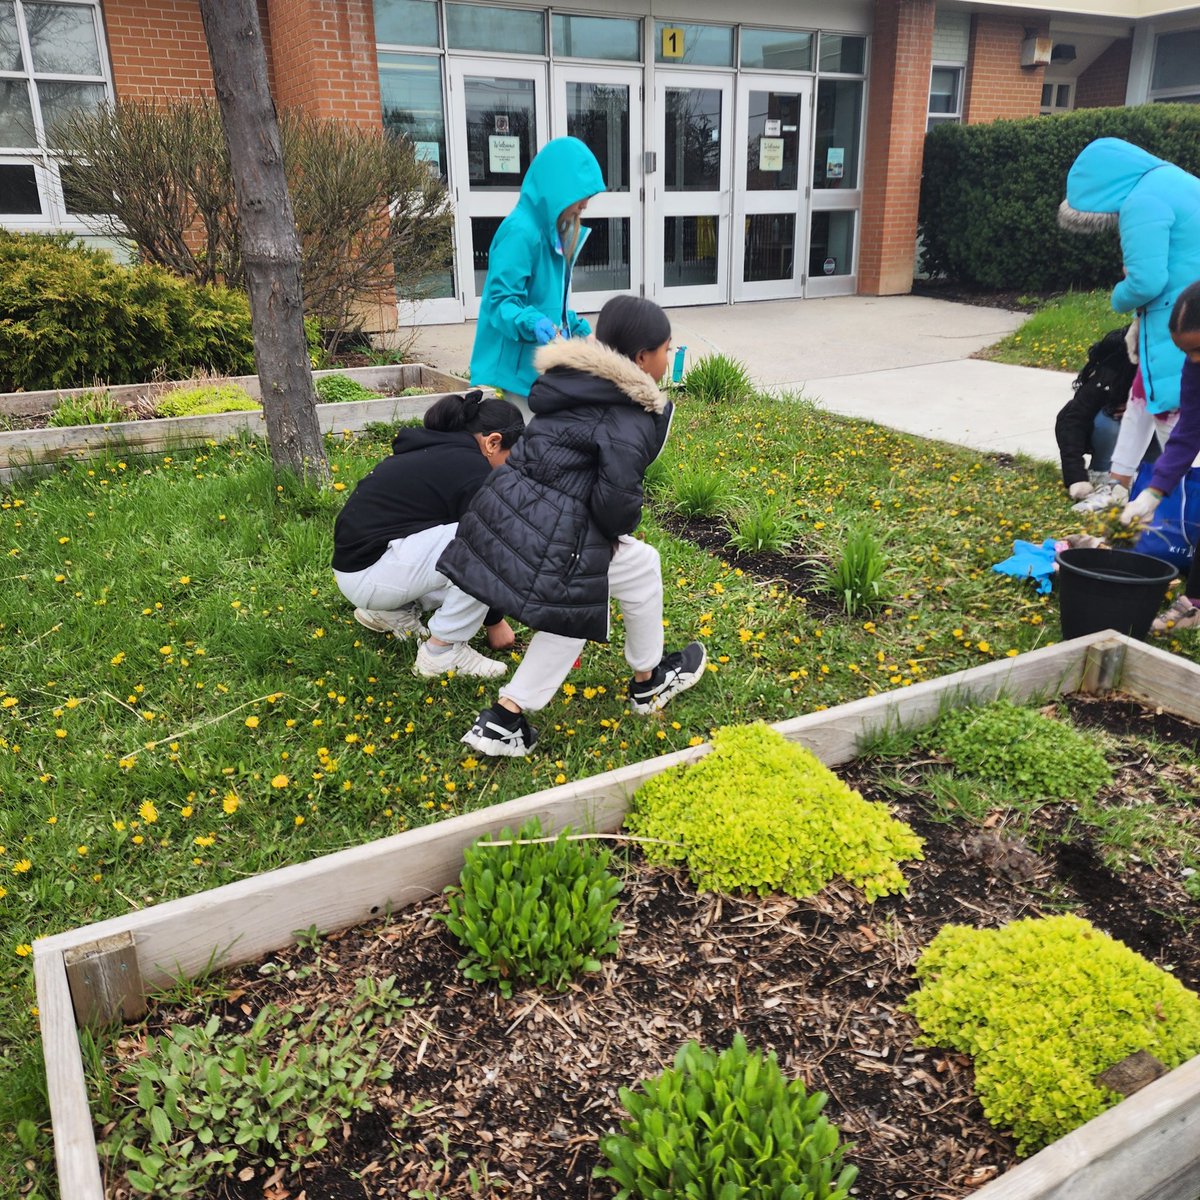 #gardenclub @BeaumondeBHJMS was in full effect today! We identified weeds and how they take over our lawn and also reflected on some of the insects that benefit from their presence. Since we are planting a pollinator garden we will get rid of the weeds. @EcoSchoolsCAN